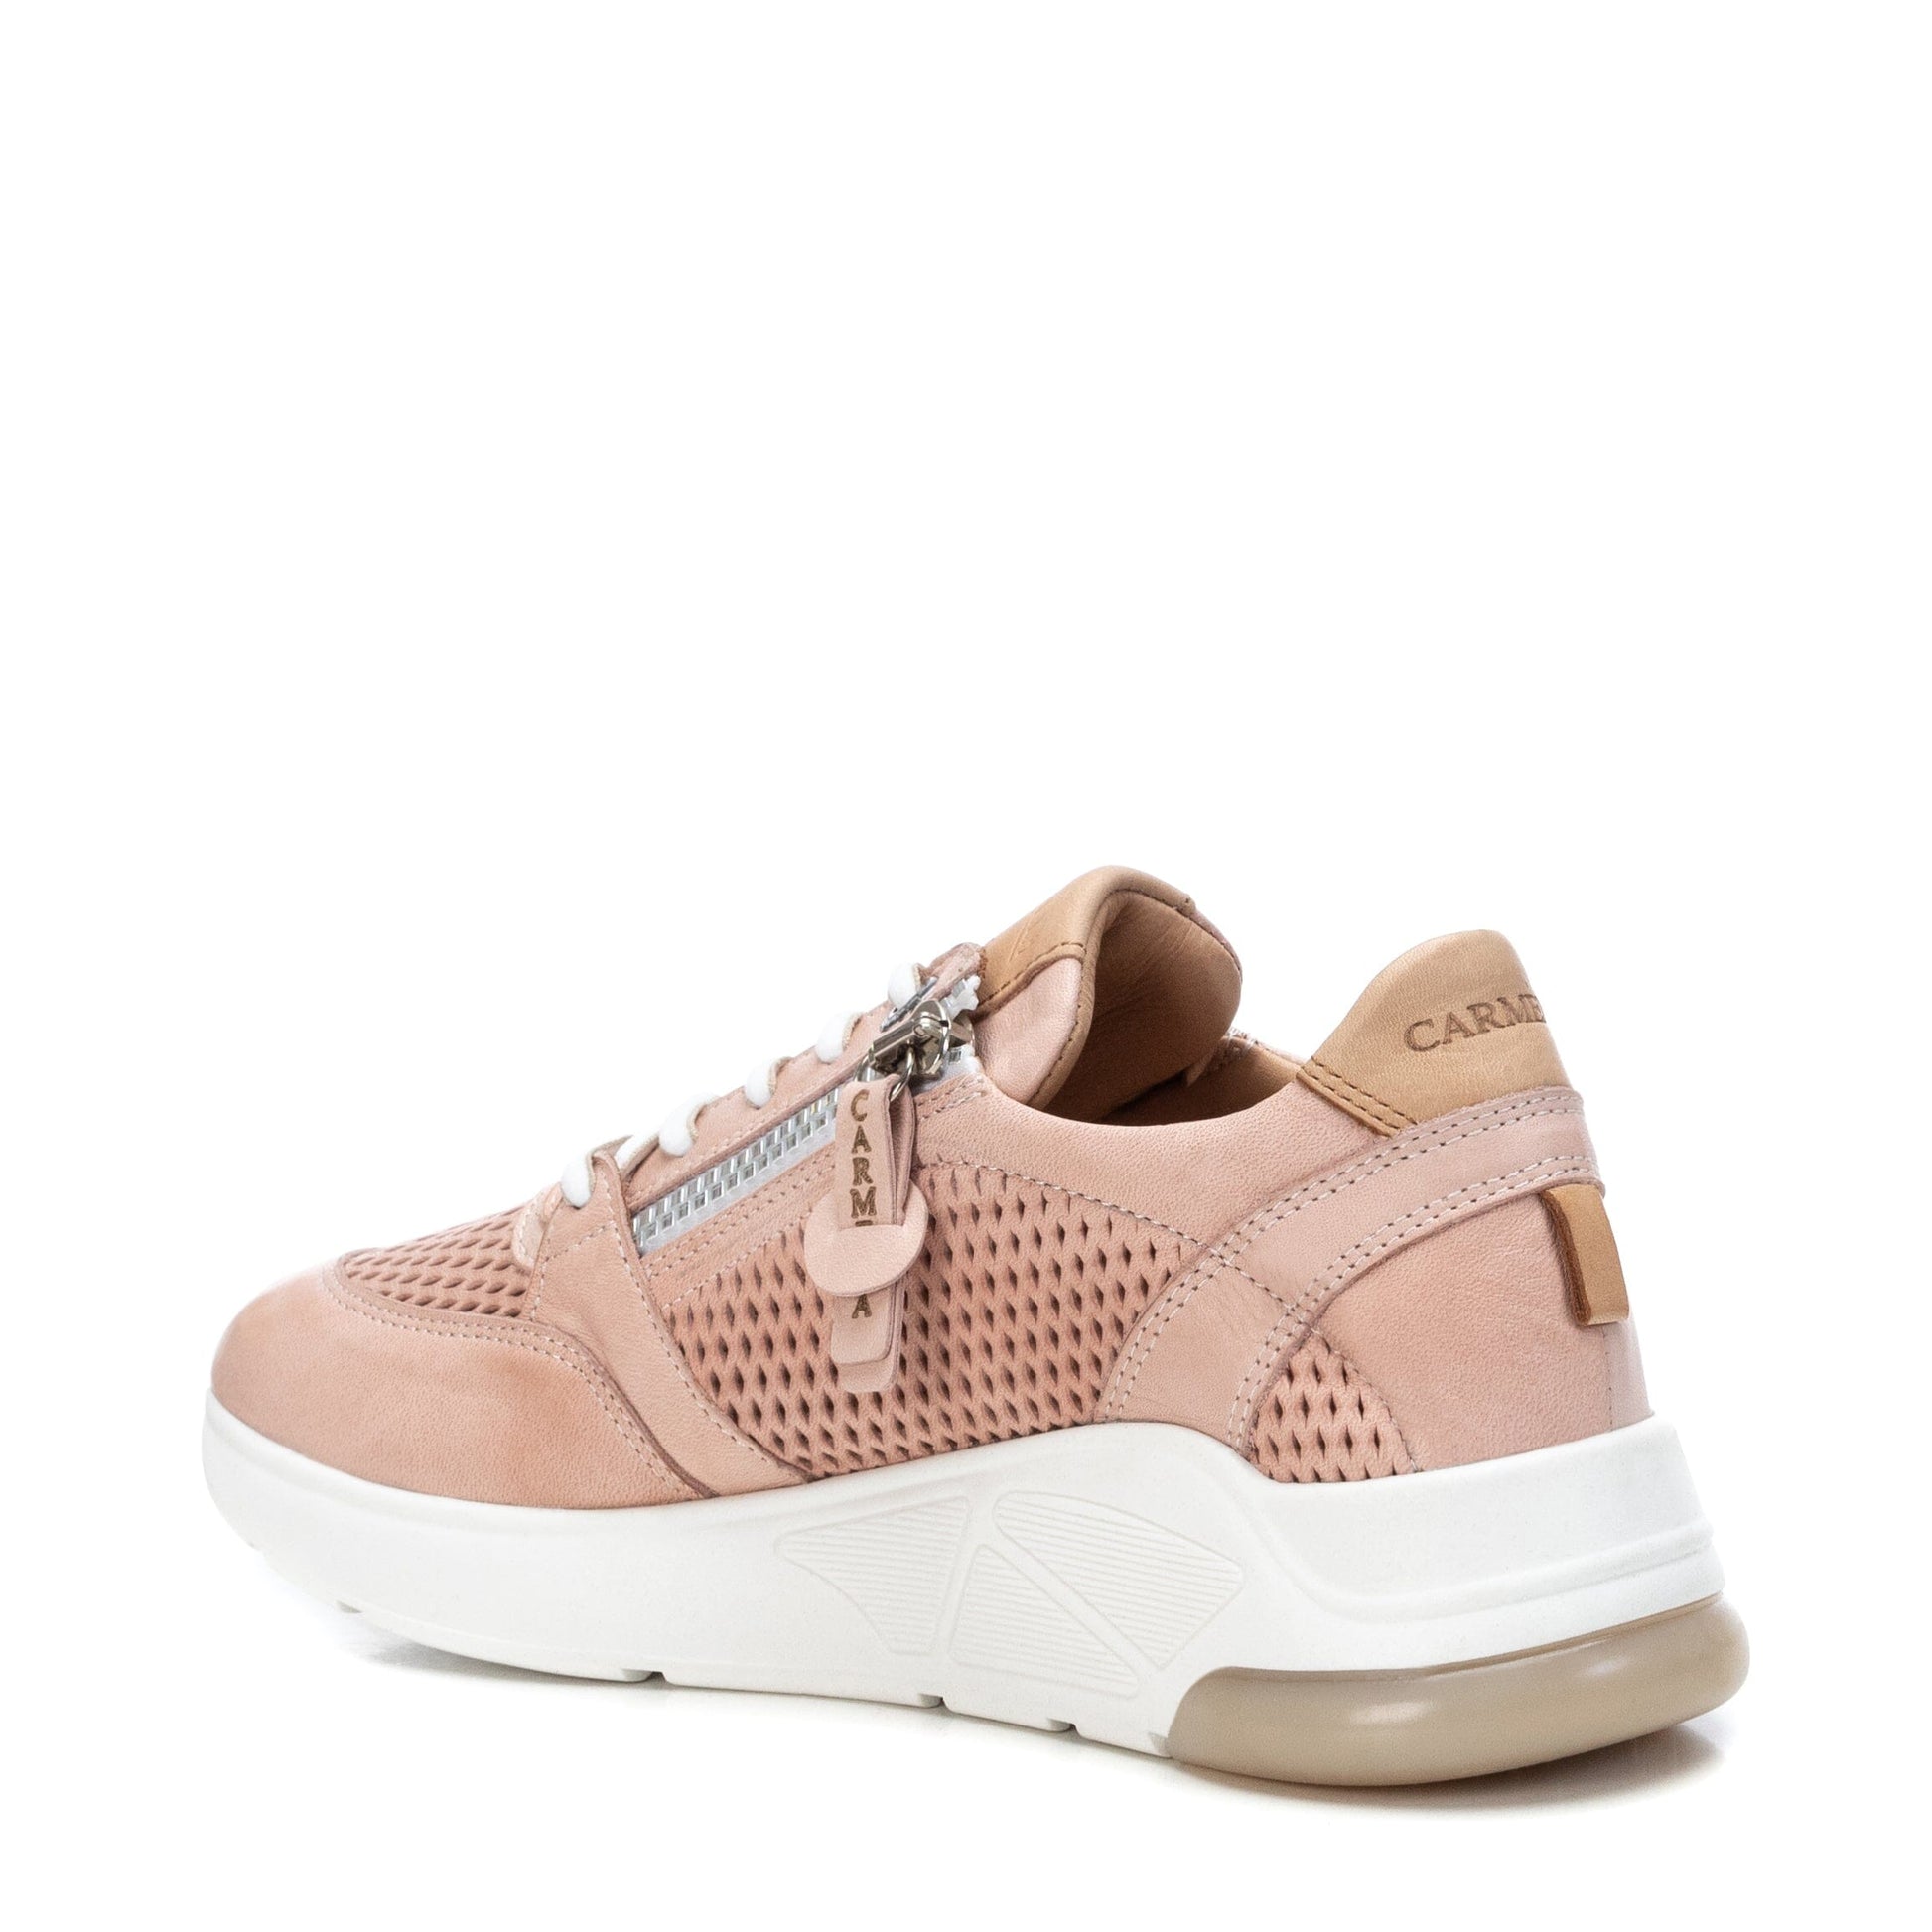 68247 Spanish Collection genuine leather sneakers with laser cut detail and zips sneakers Sam Star shoes Pale pink 38 